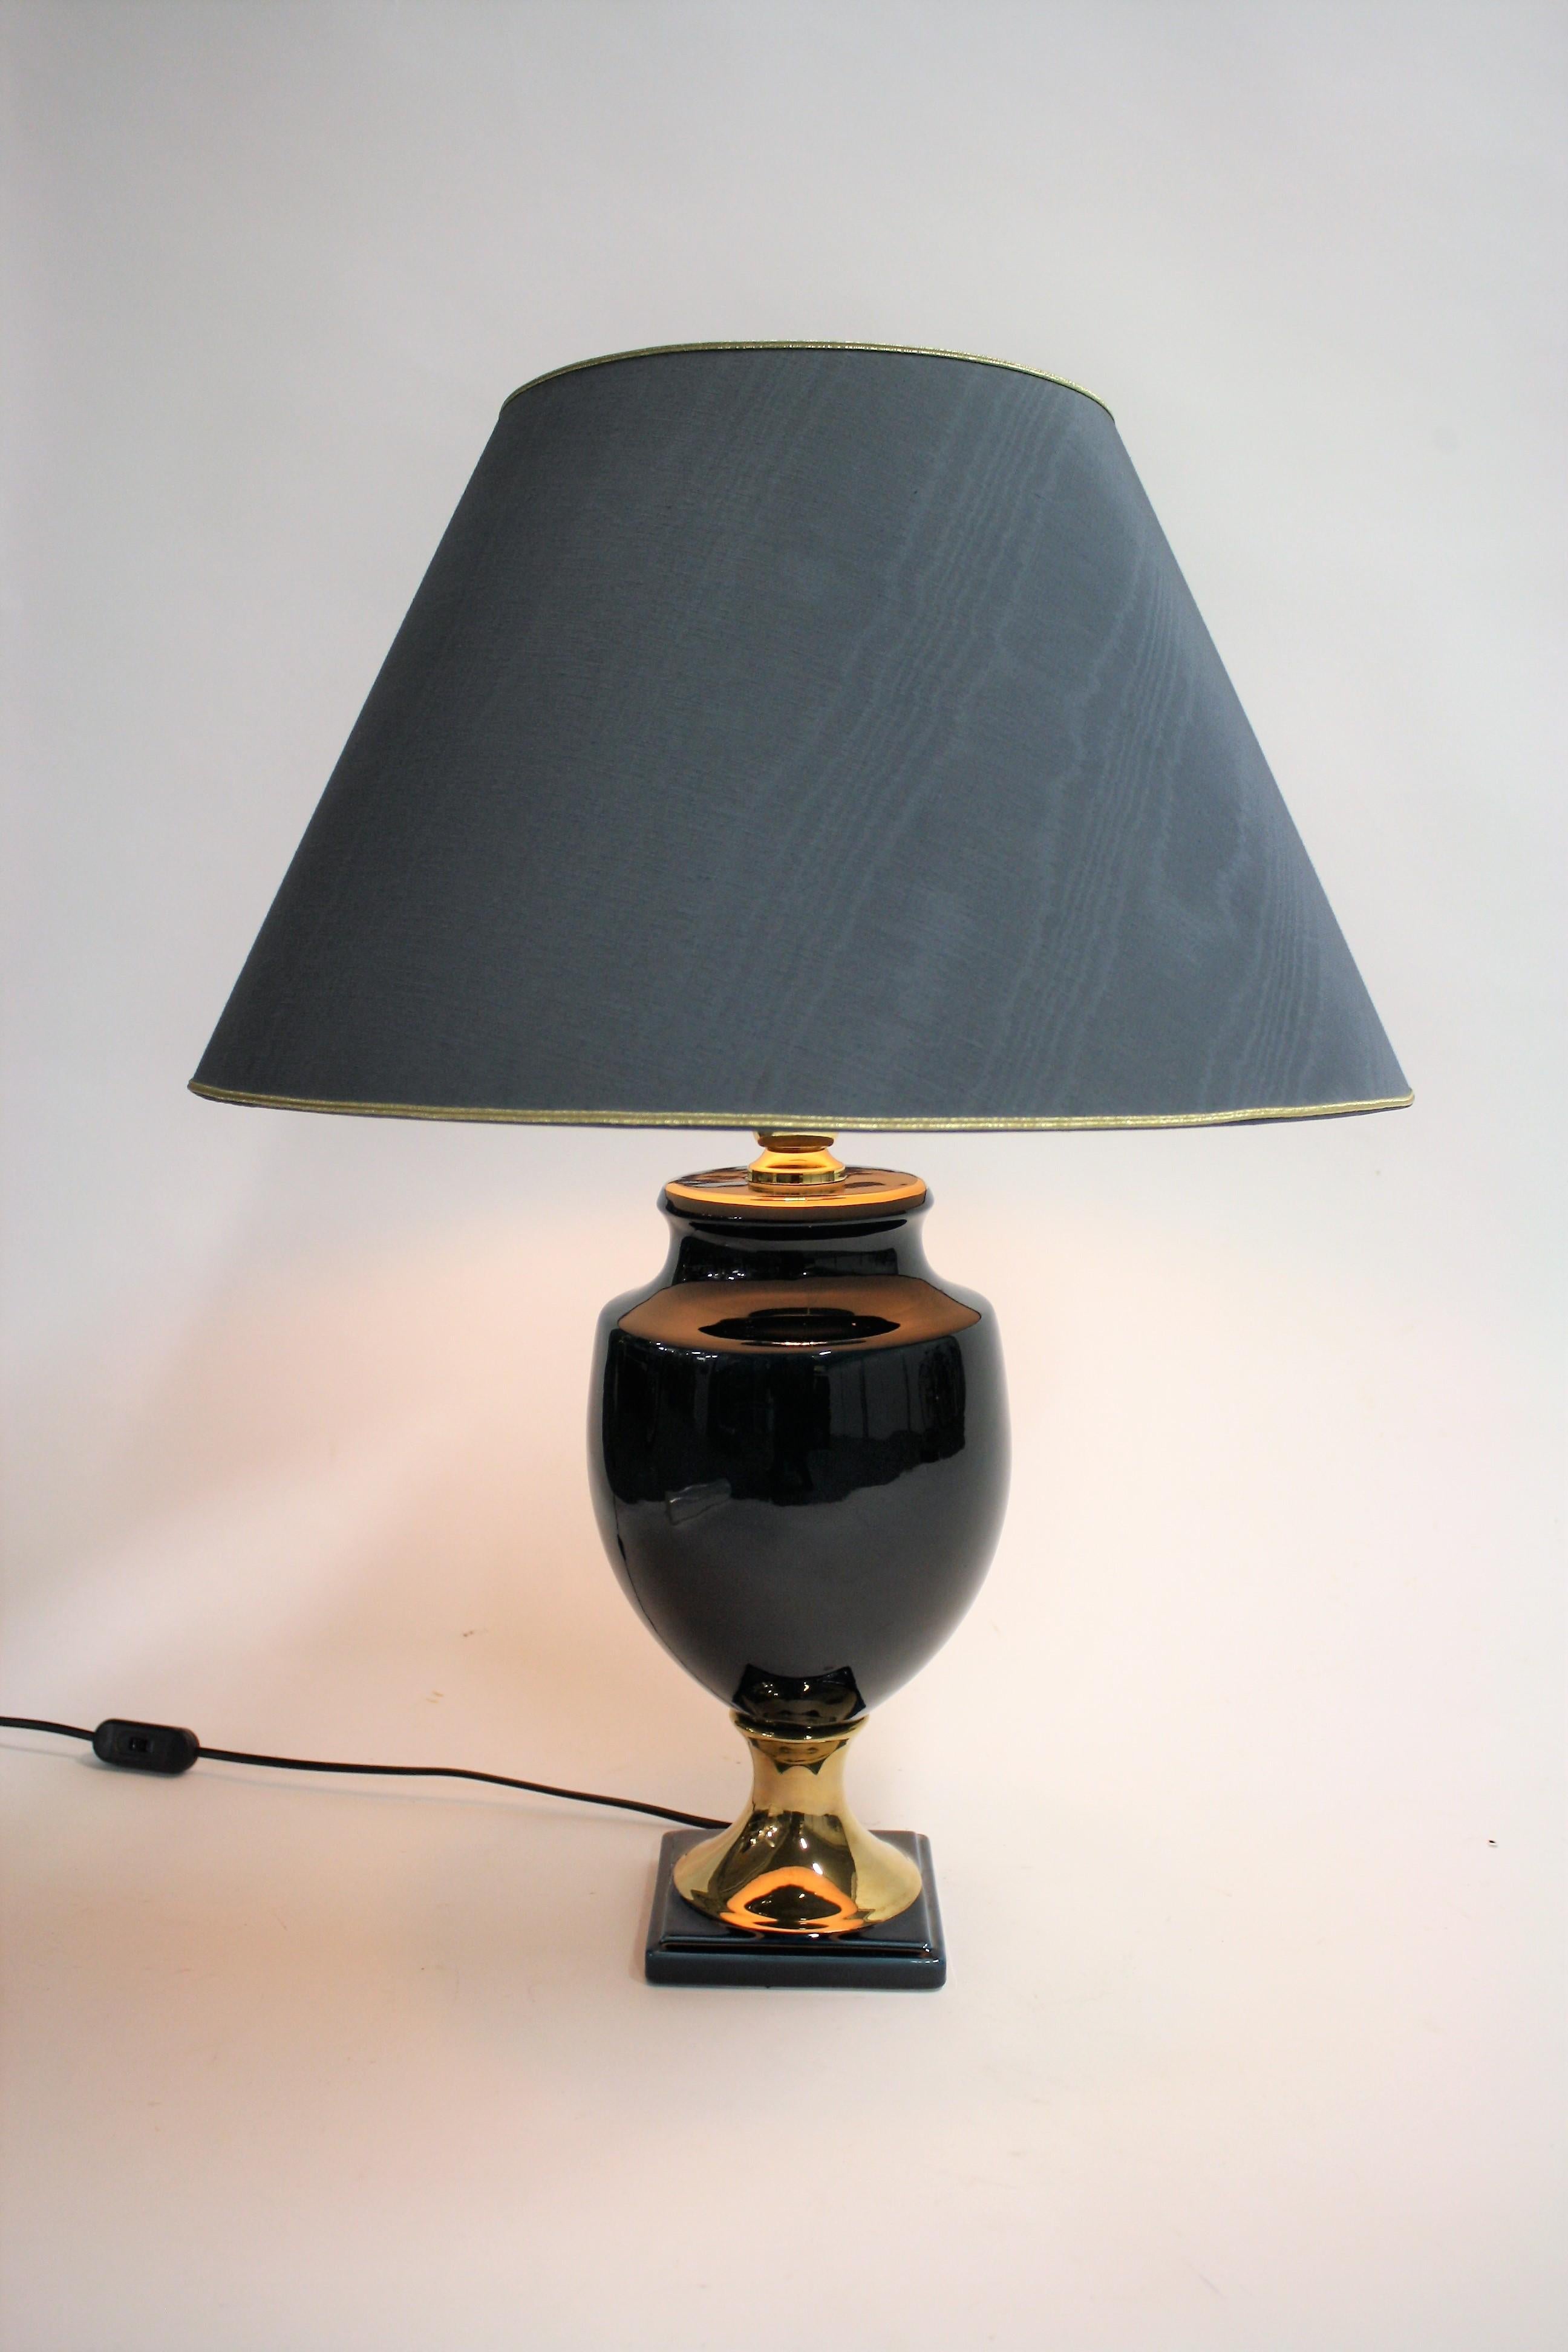 Charming dark blue ceramic table lamp signed 'Bosa'.

This Italian made table lamp comes with a large fabric shade.

Very good condition.

Tested and ready for use with a regular E26/E27 light bulb.

1980s, Italy.

Dimensions:
Height